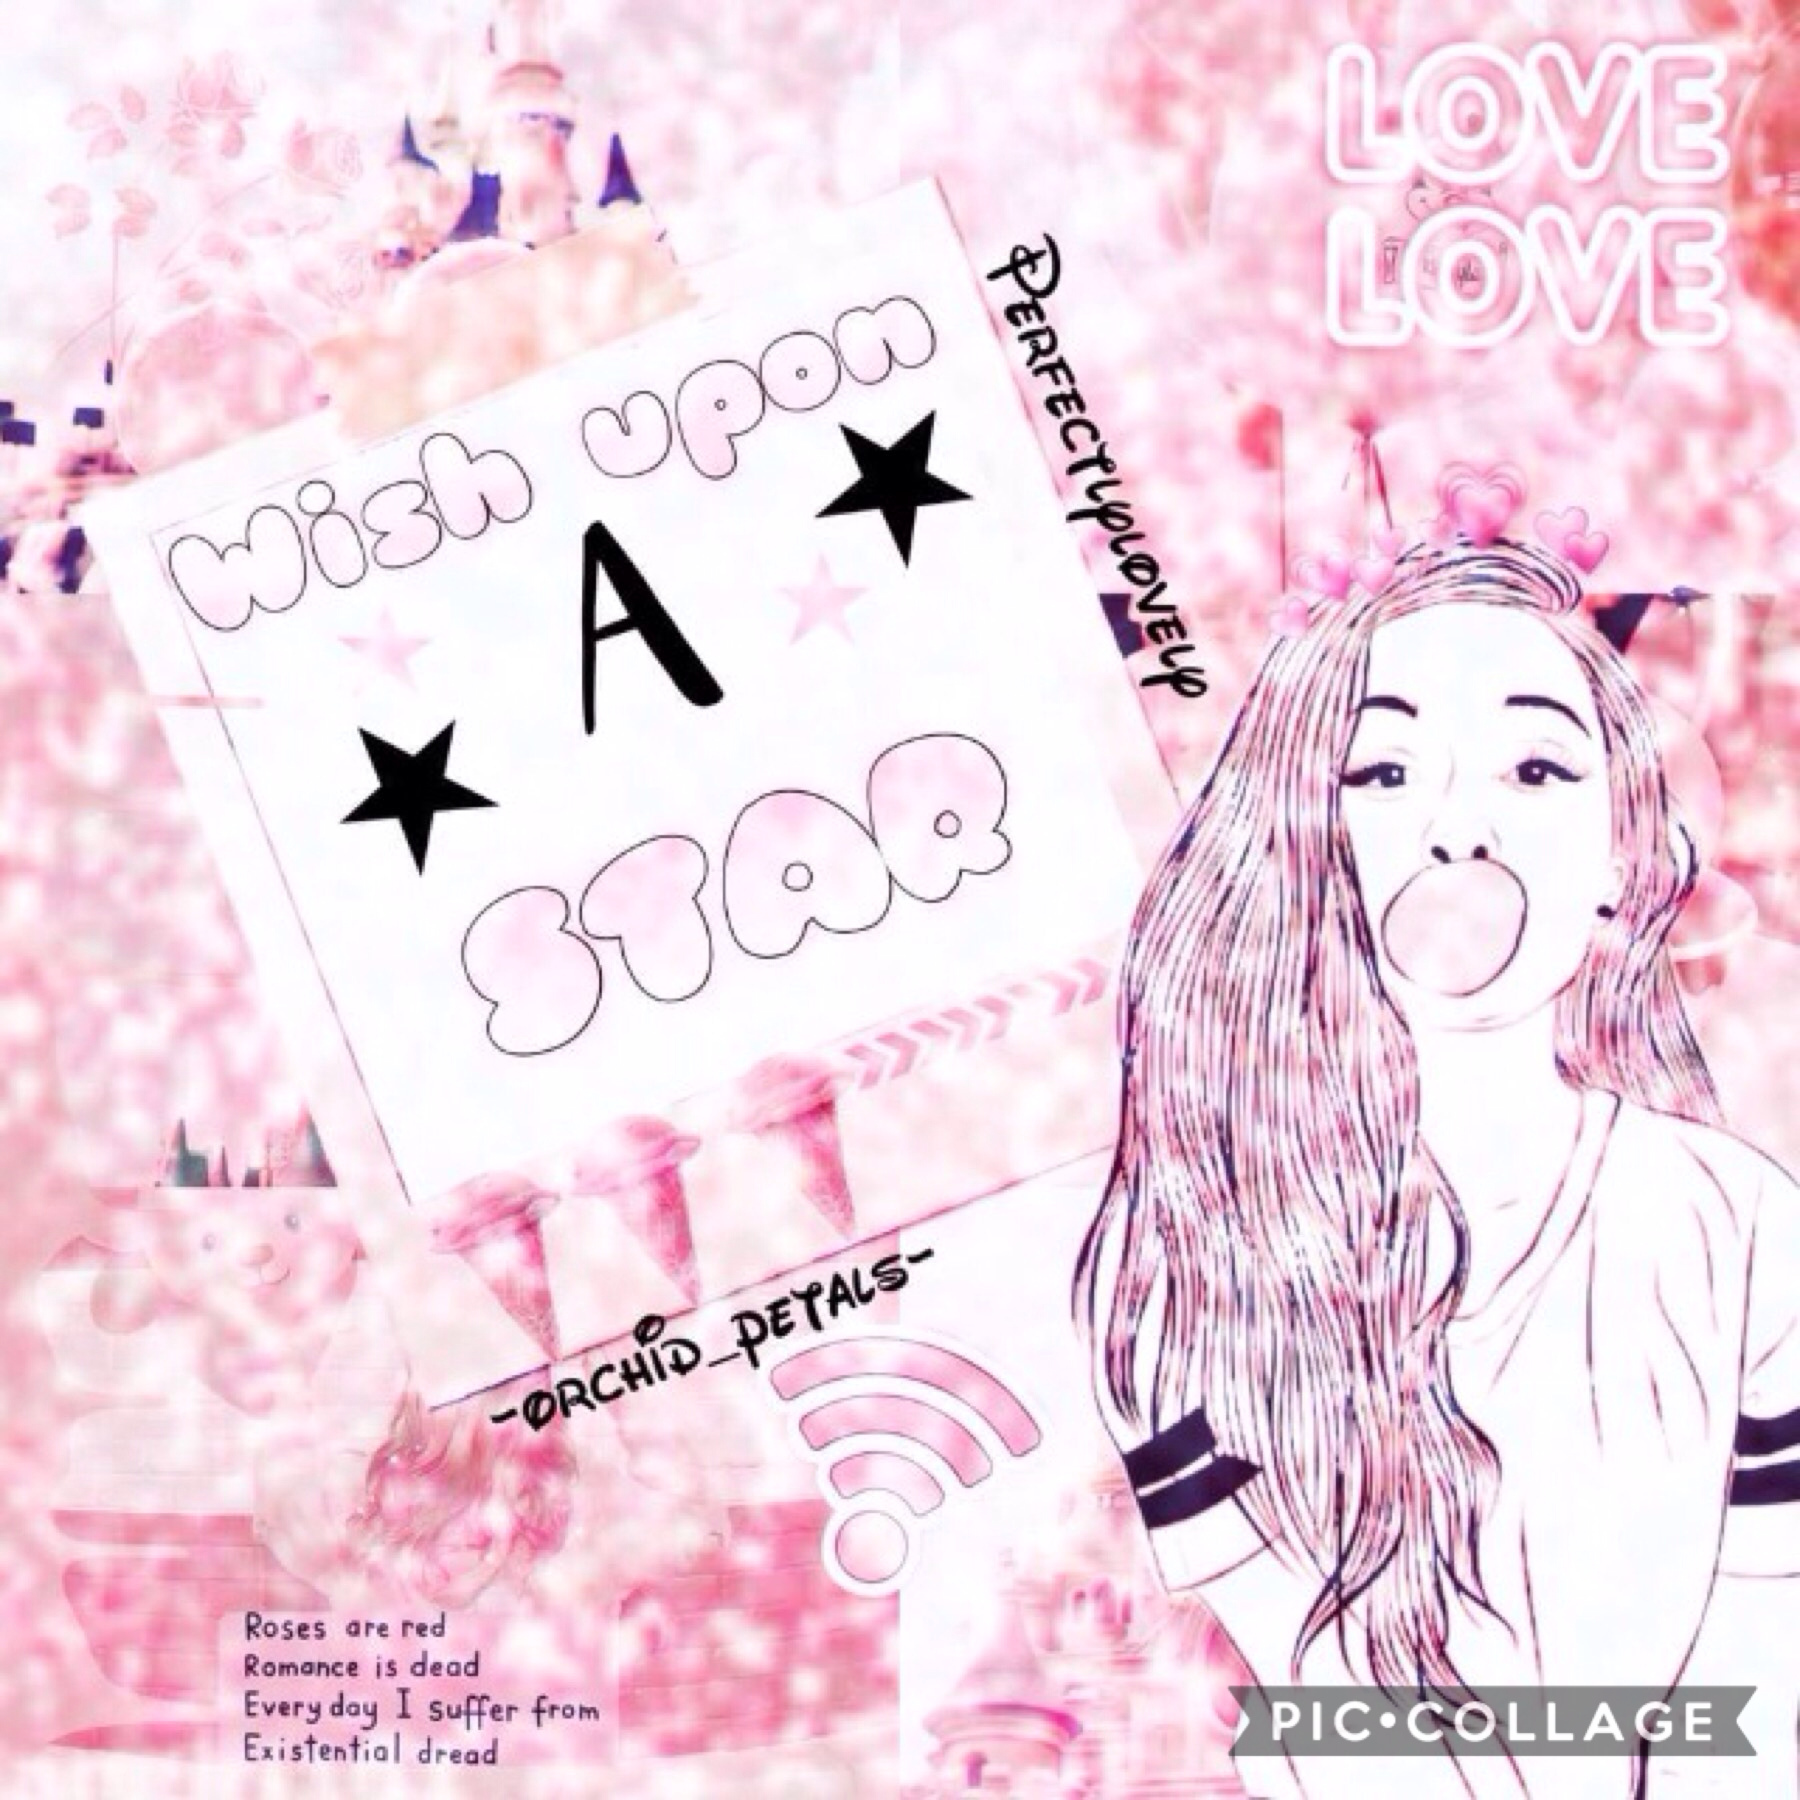 Amazing collab with...
❤️PERFECTLYLOVELY! Omg I love this so much thank you for collaging with me I did the quotes and background and she put it all together xx I hope we can collab again soon ❤️❤️❤️